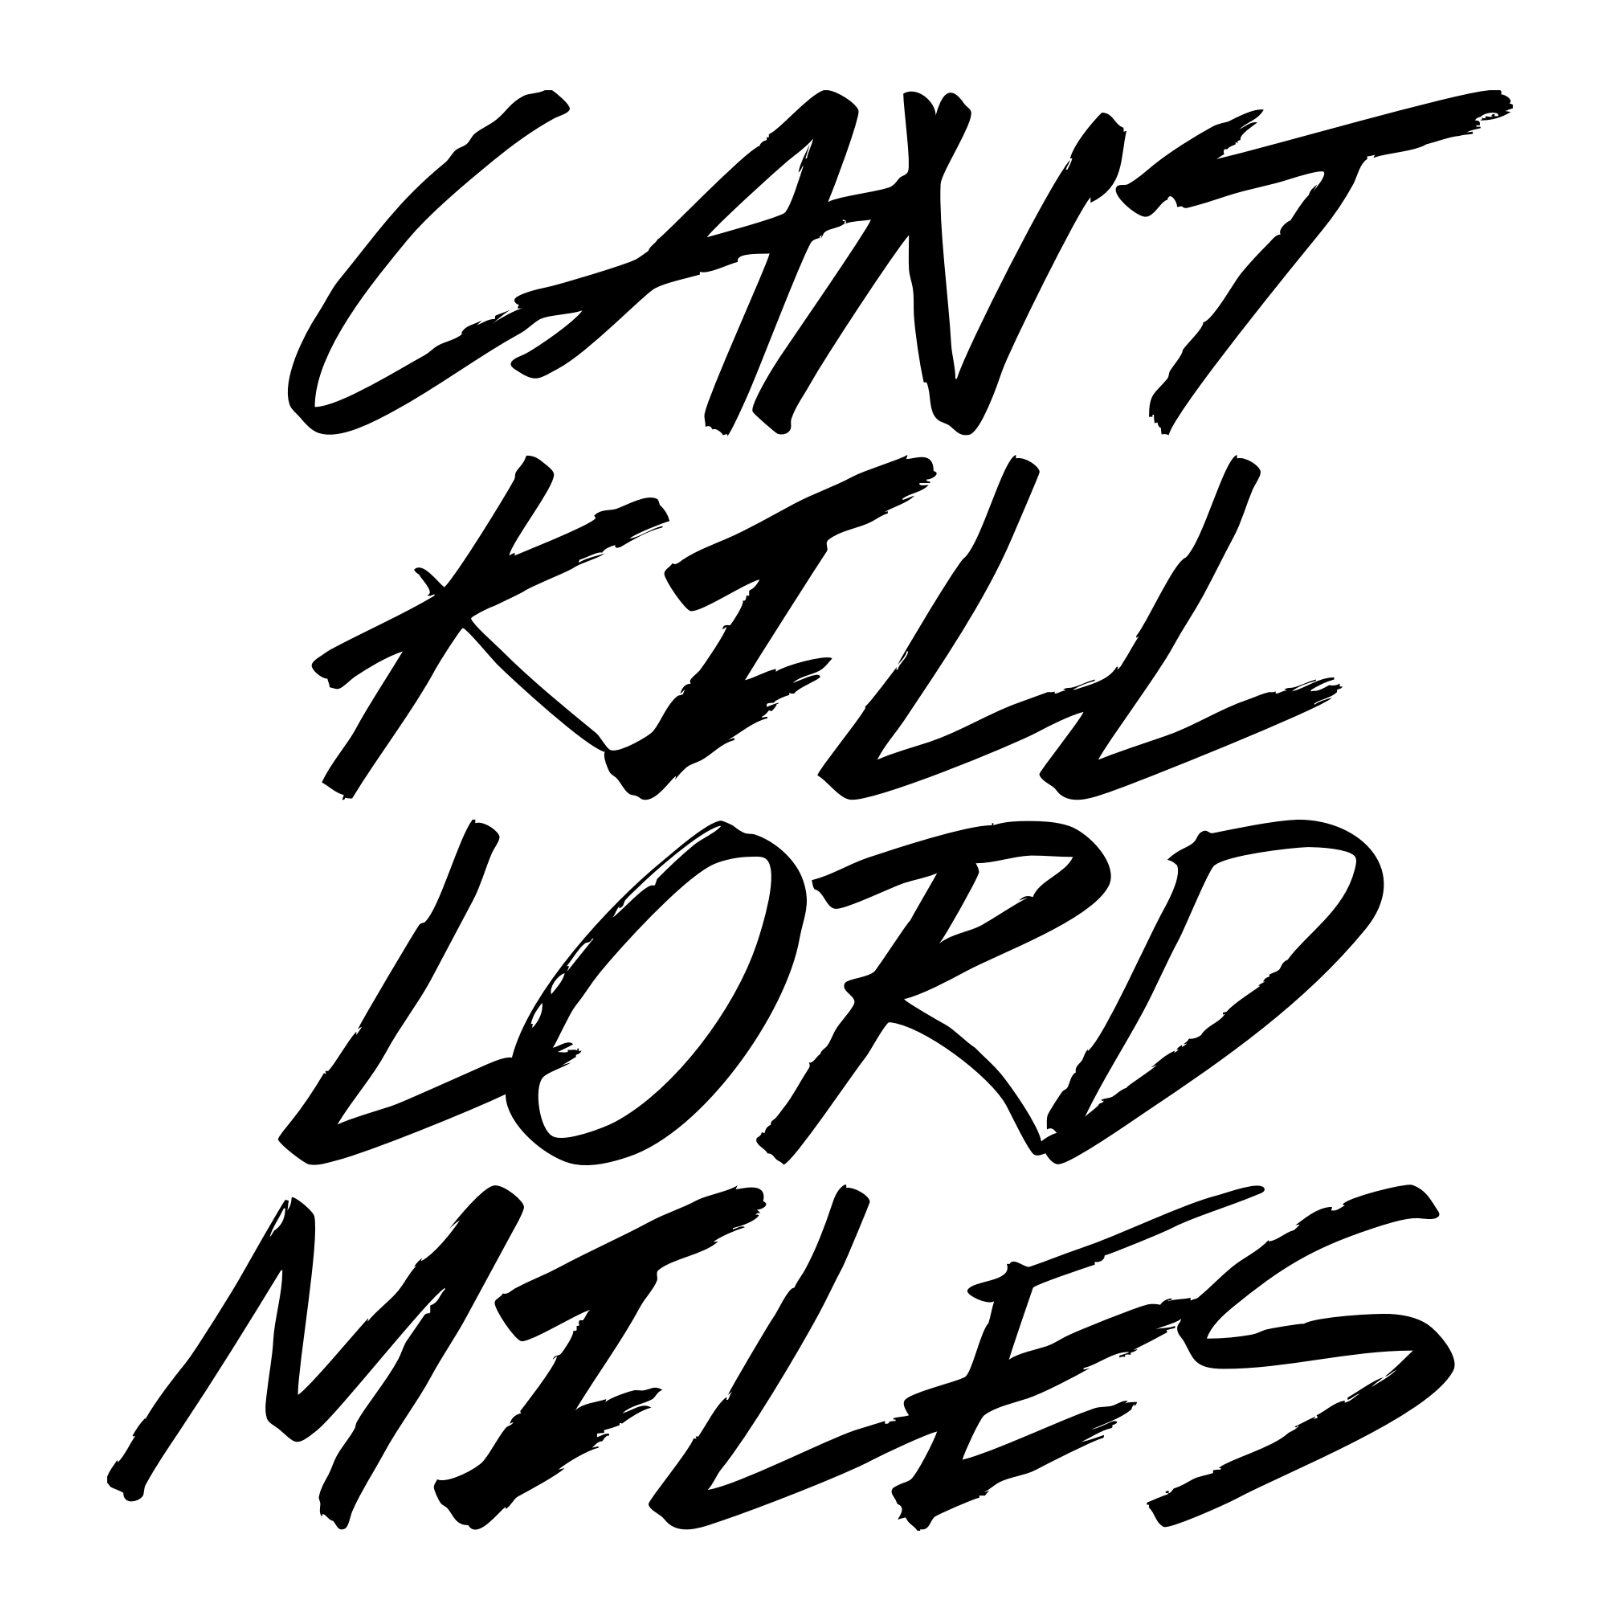 Cant Kill Lord Miles (White) Racerback